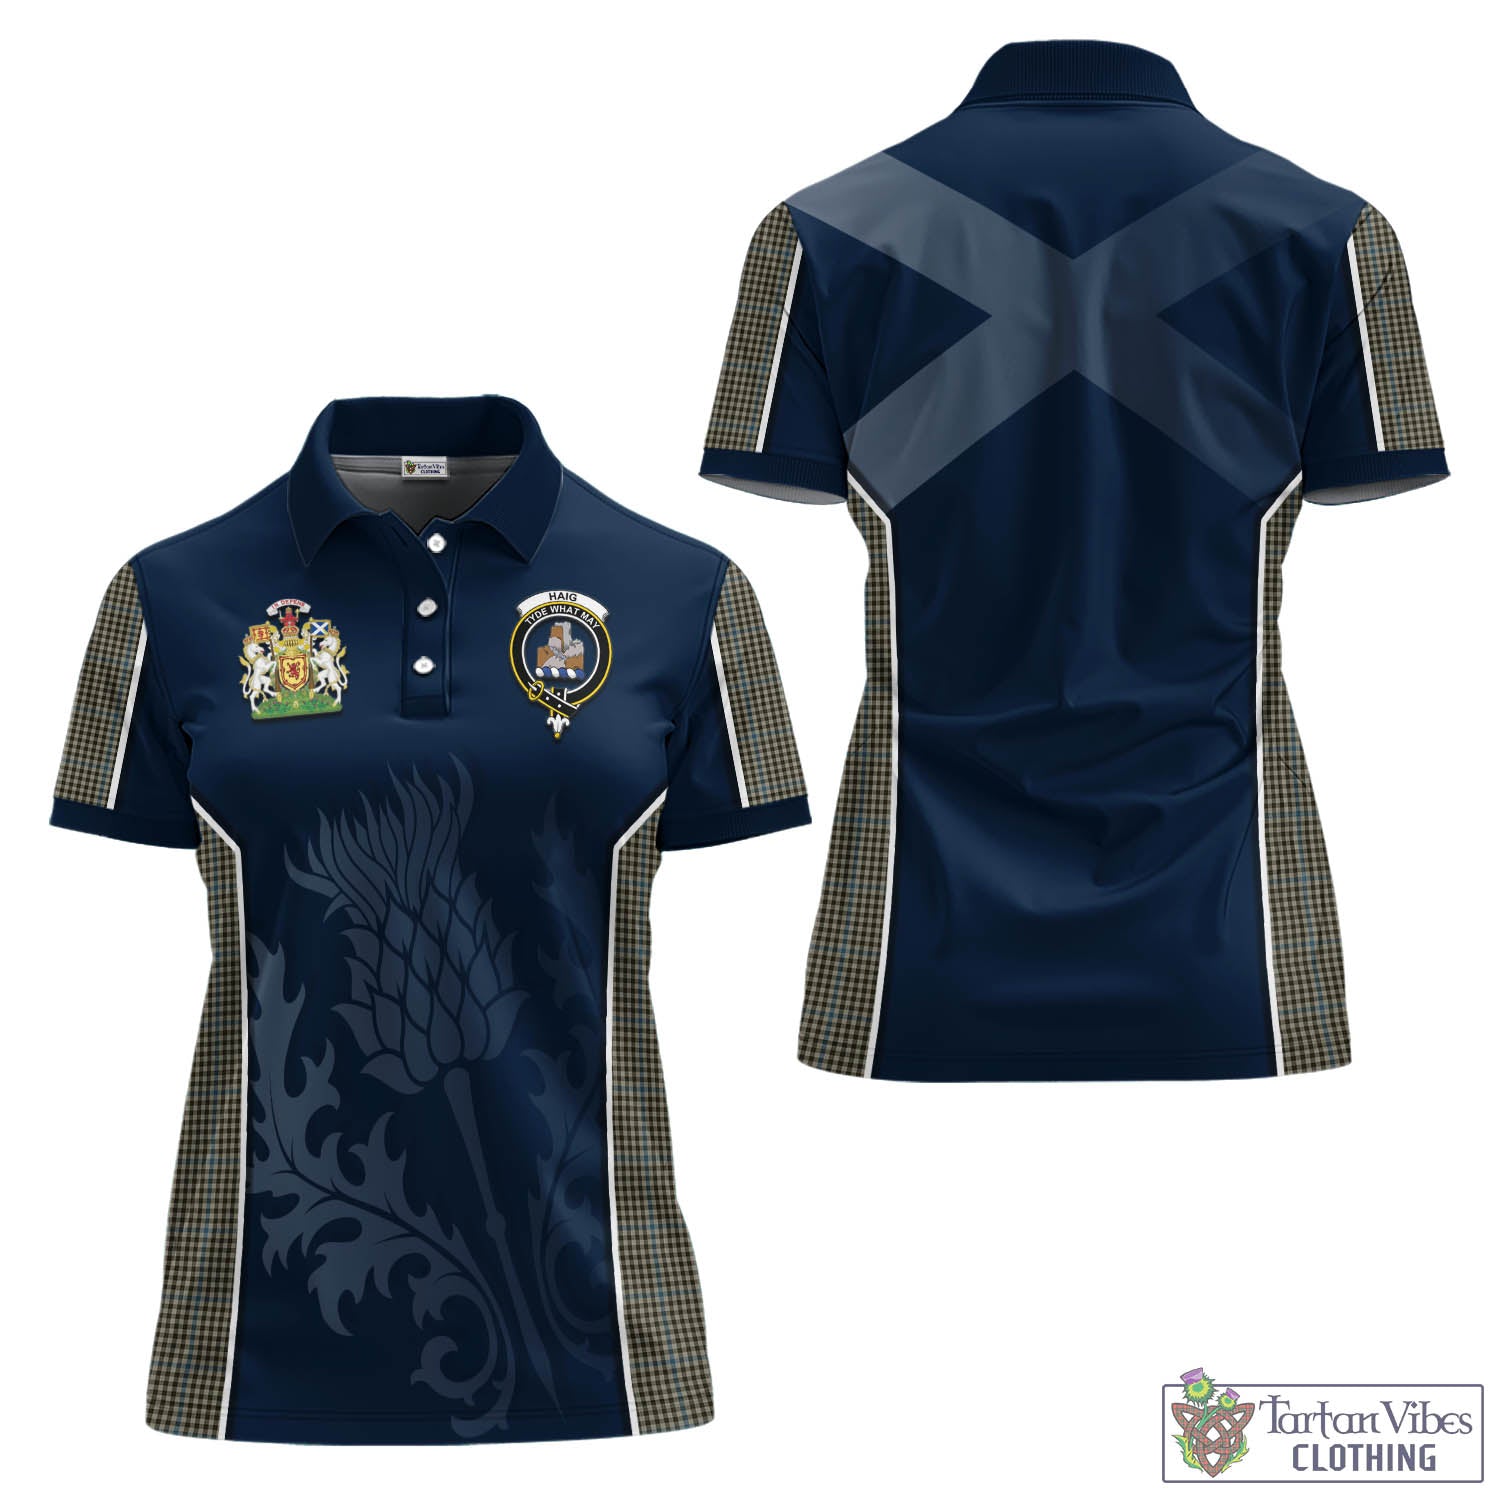 Tartan Vibes Clothing Haig Tartan Women's Polo Shirt with Family Crest and Scottish Thistle Vibes Sport Style